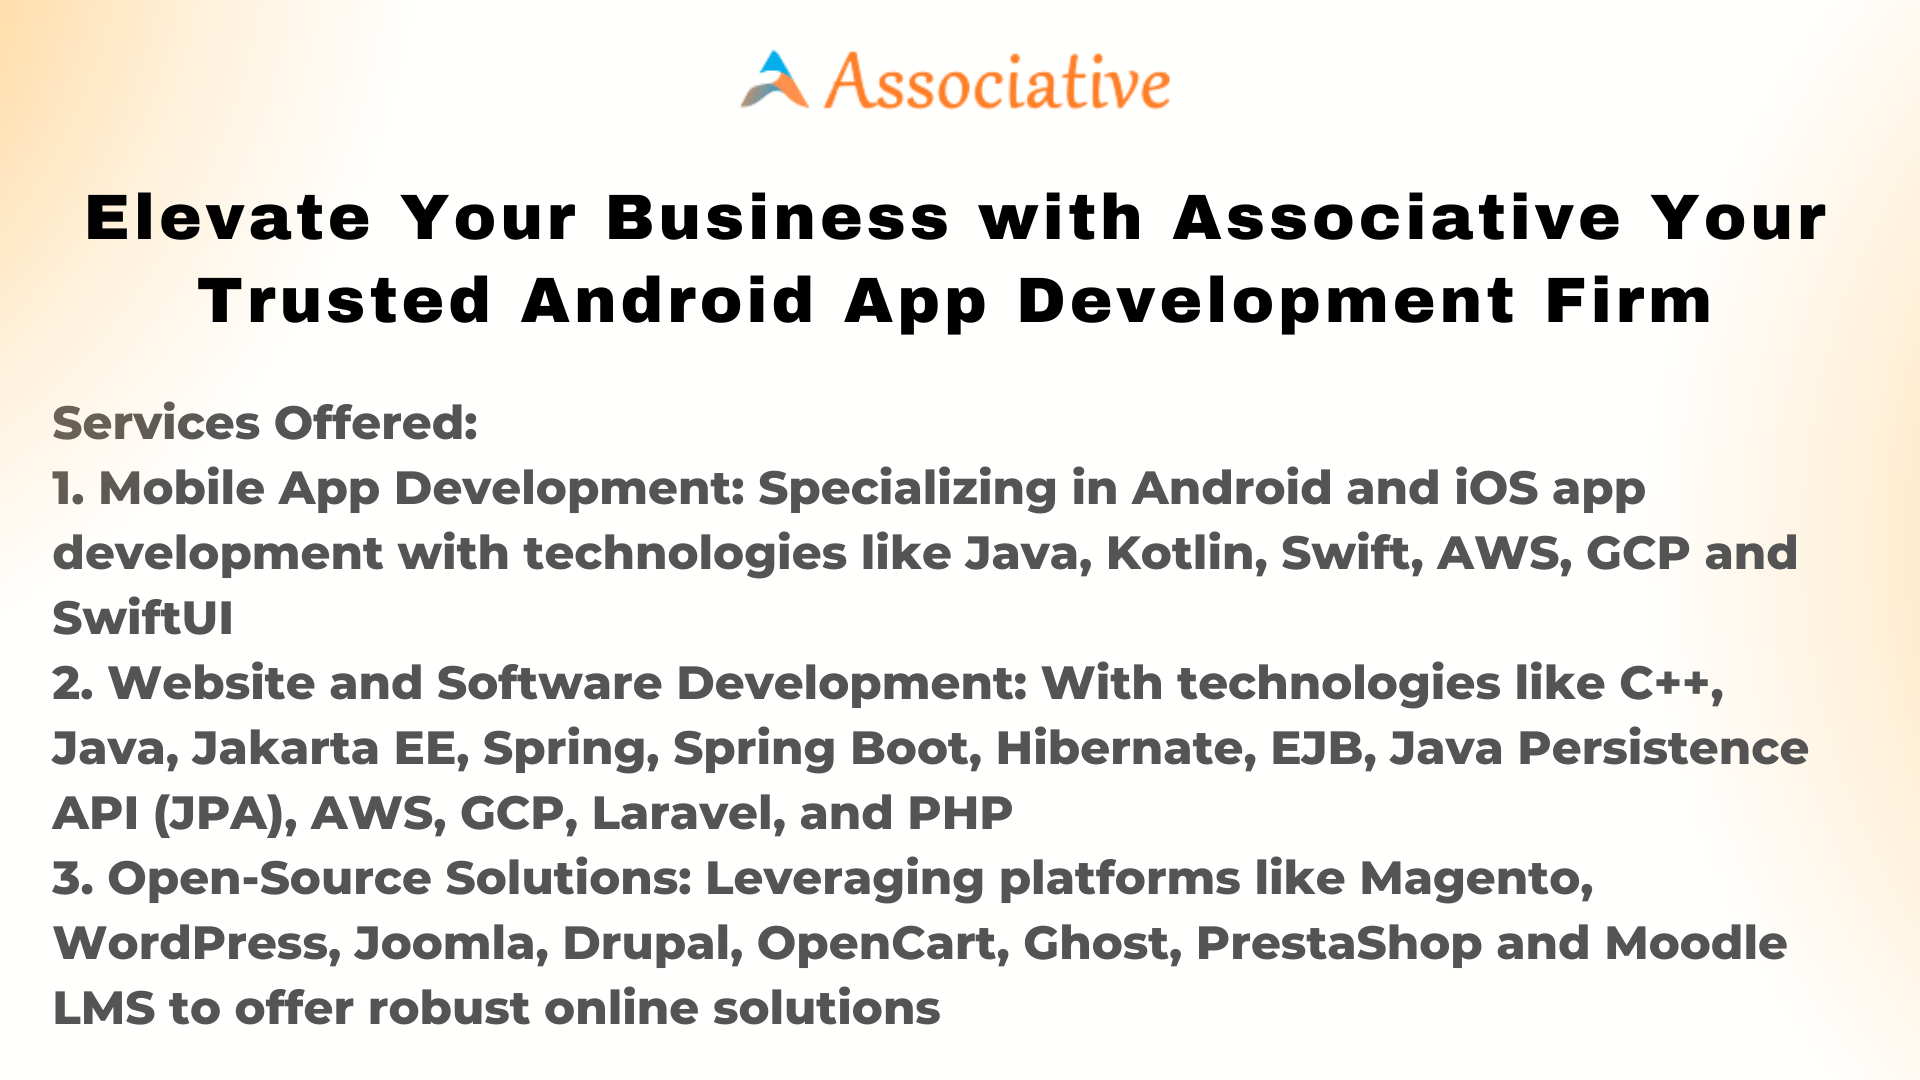 Elevate Your Business with Associative Your Trusted Android App Development Firm